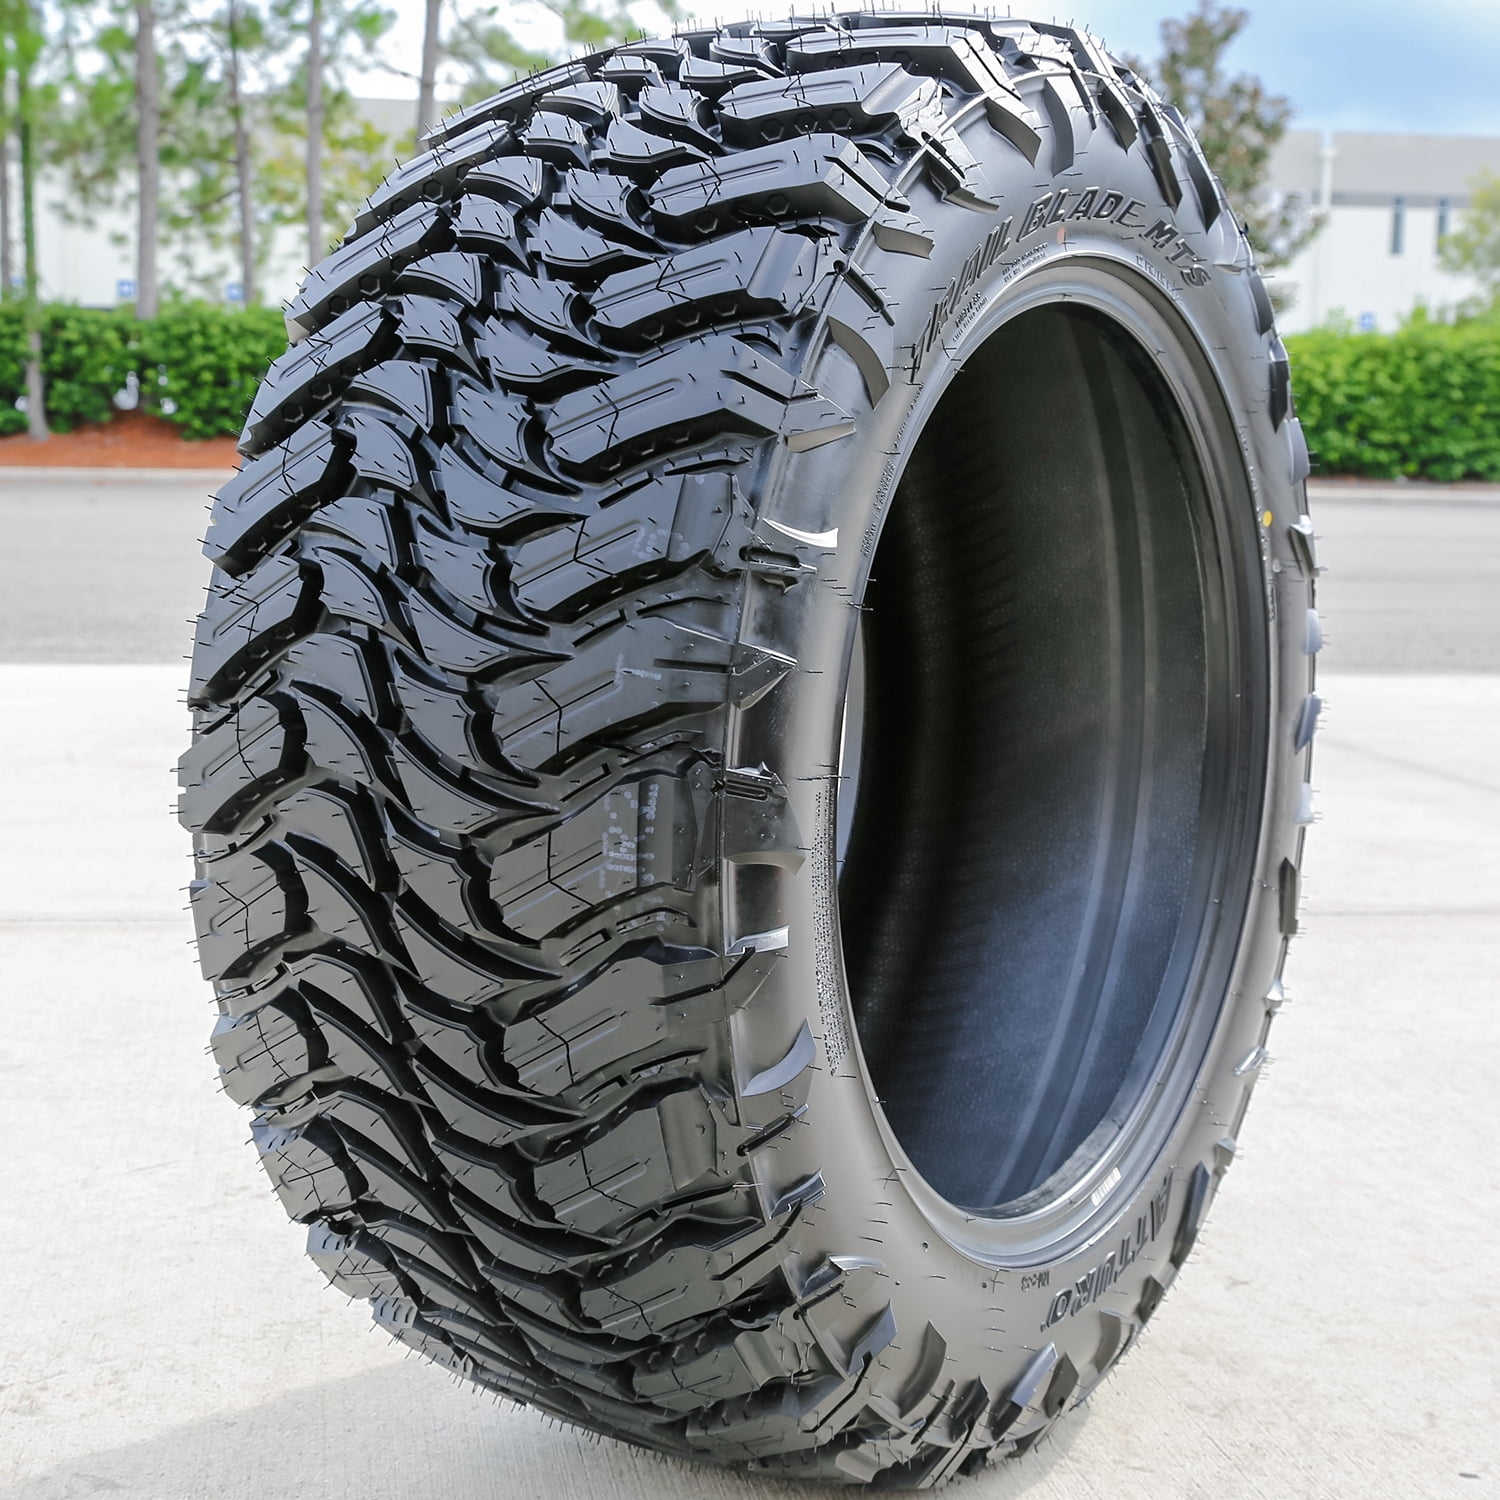 37x12.50R17 Toyo Open Country M/T 8 ply Mud Terrain Tires – Core